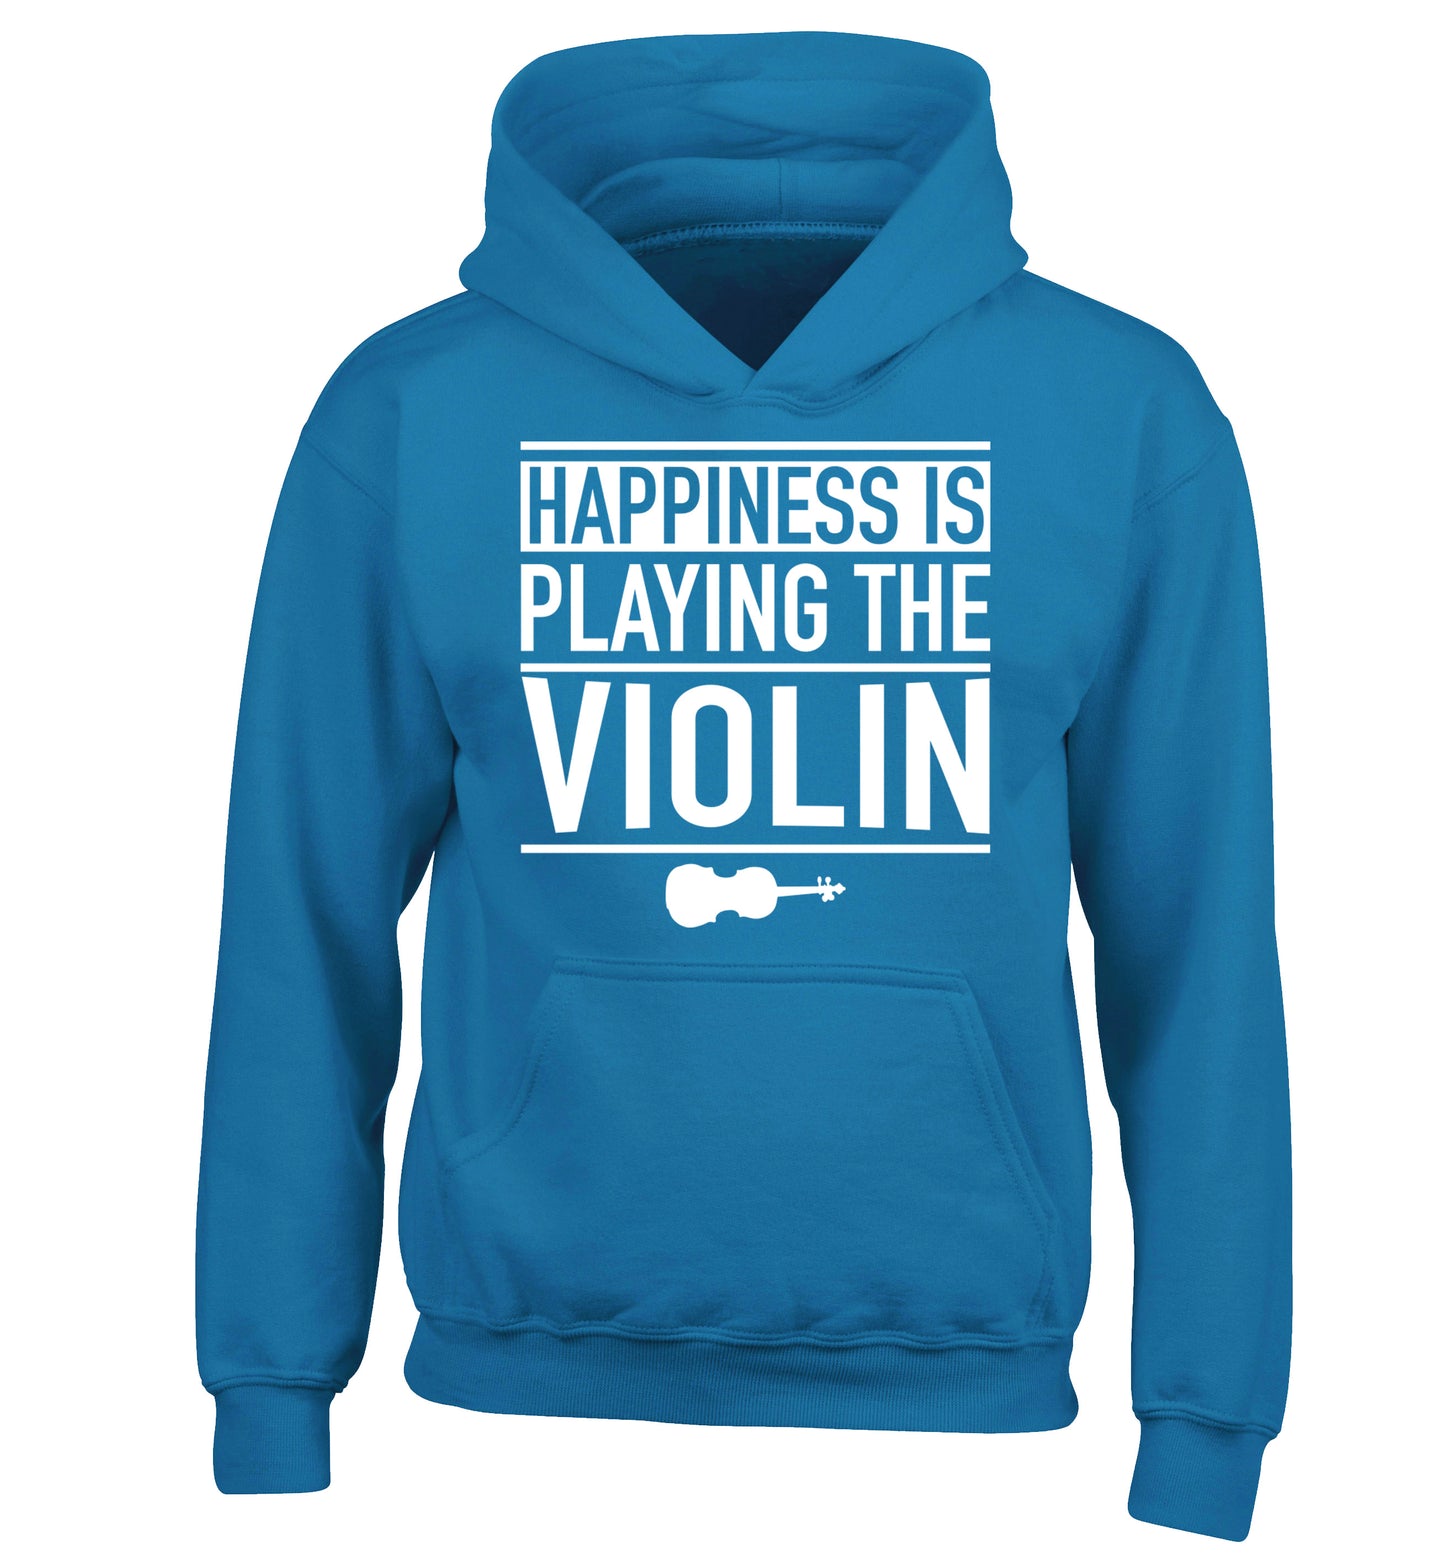 Happiness is playing the violin children's blue hoodie 12-13 Years